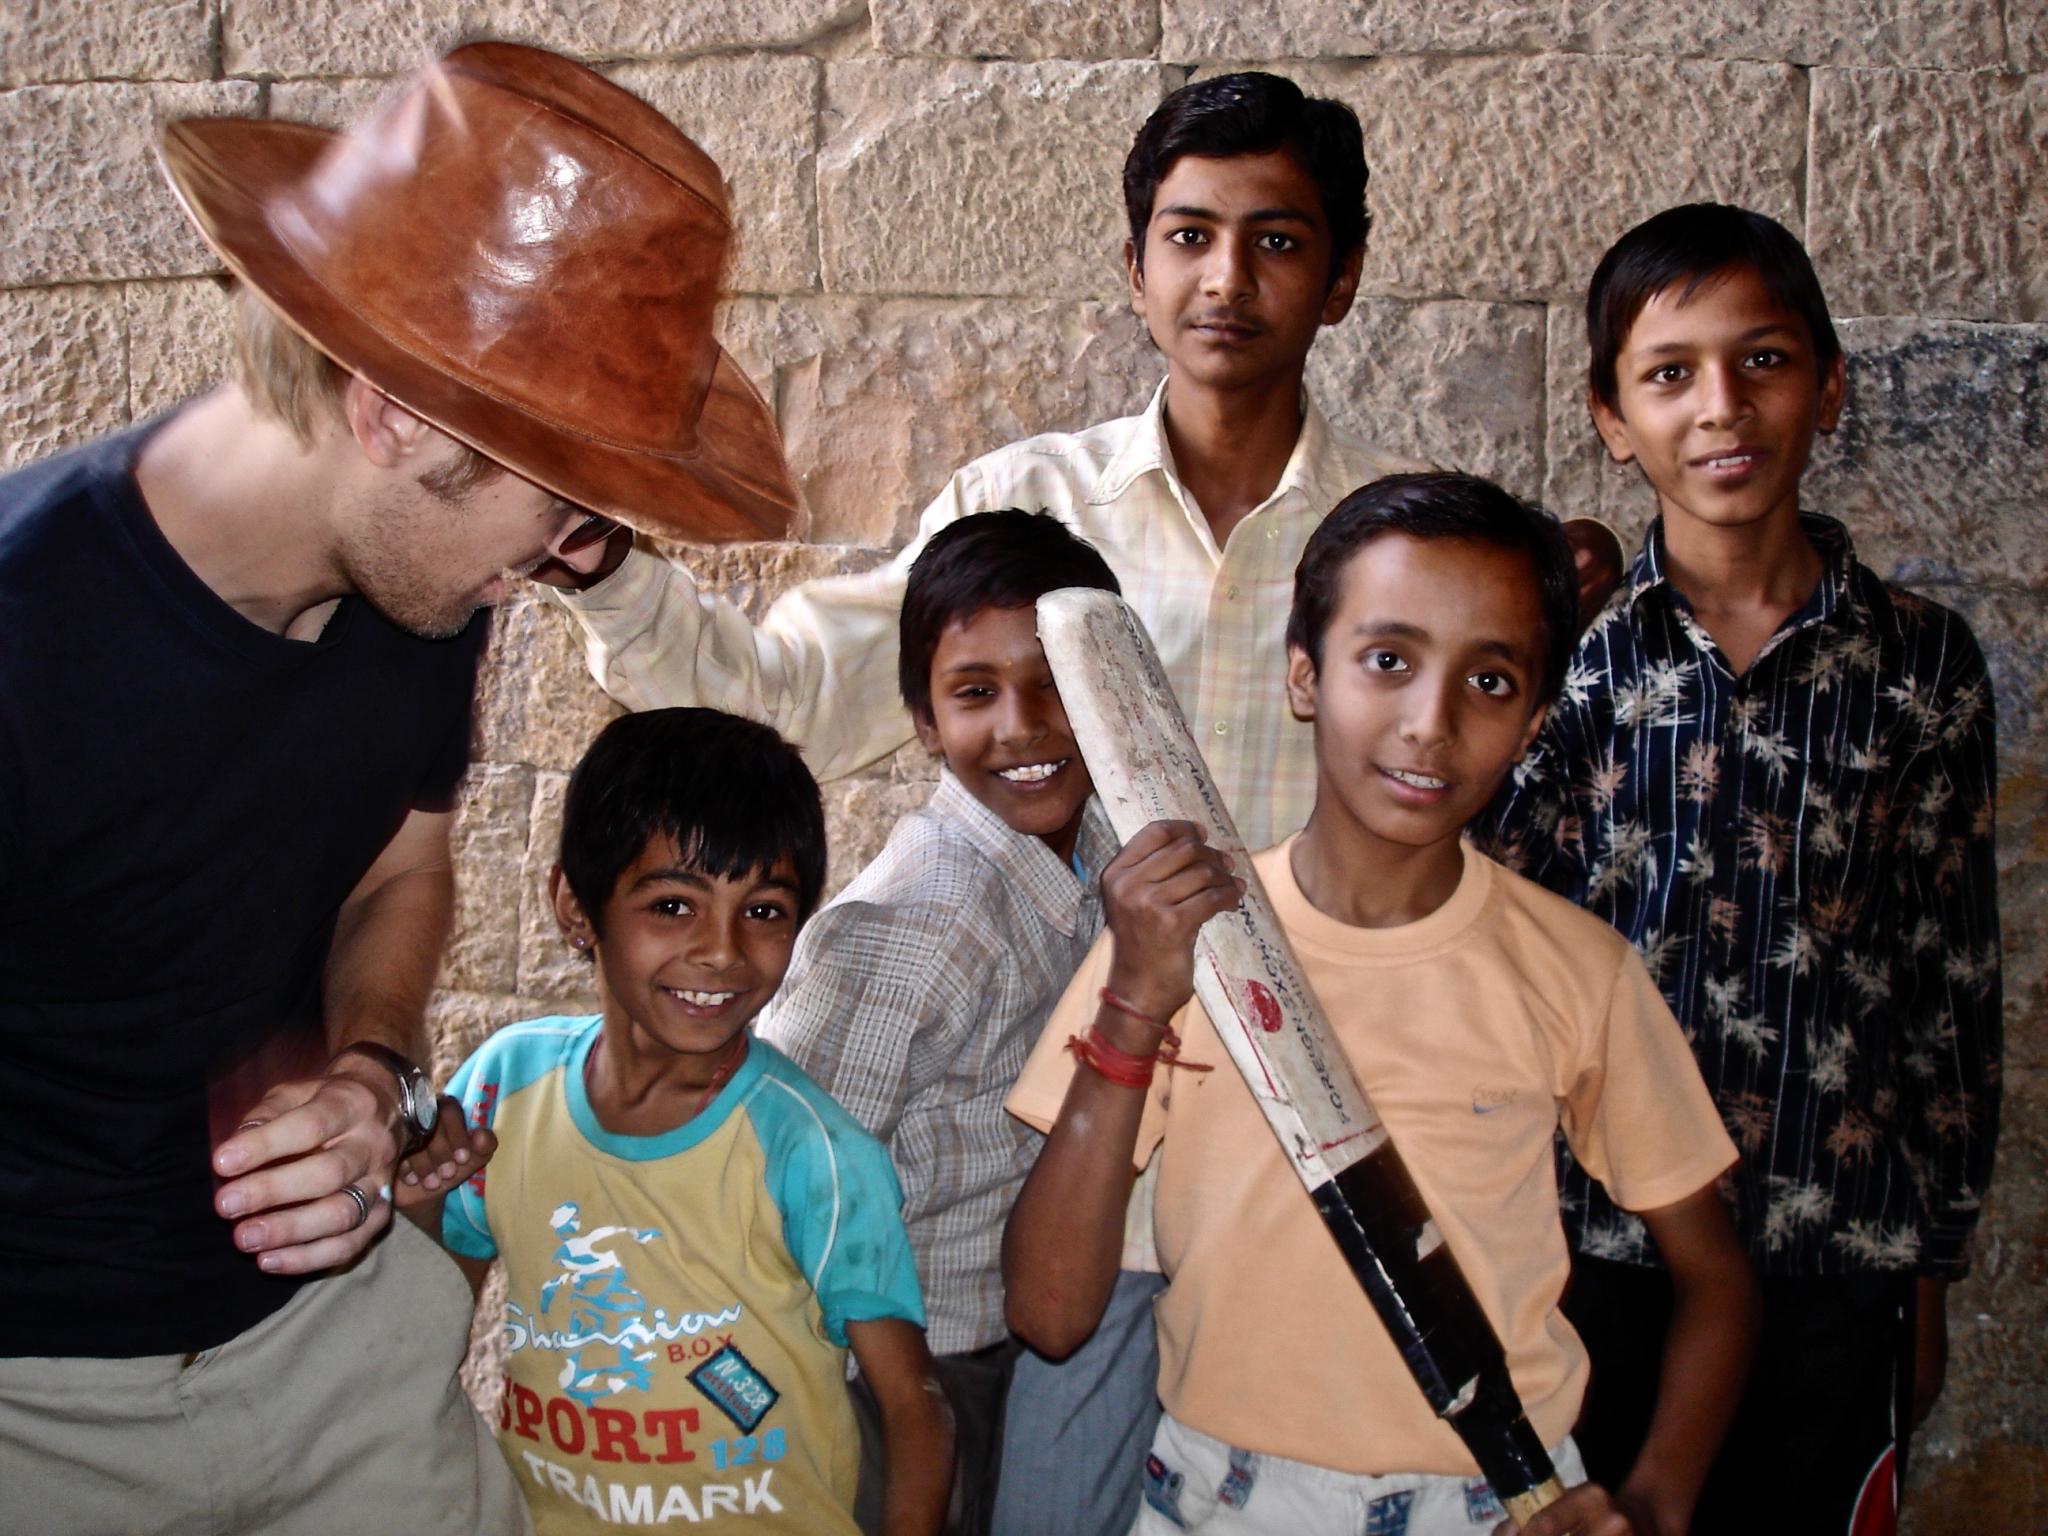 Geoff With Young Cricketers in Jaisalmer, Rajasthan